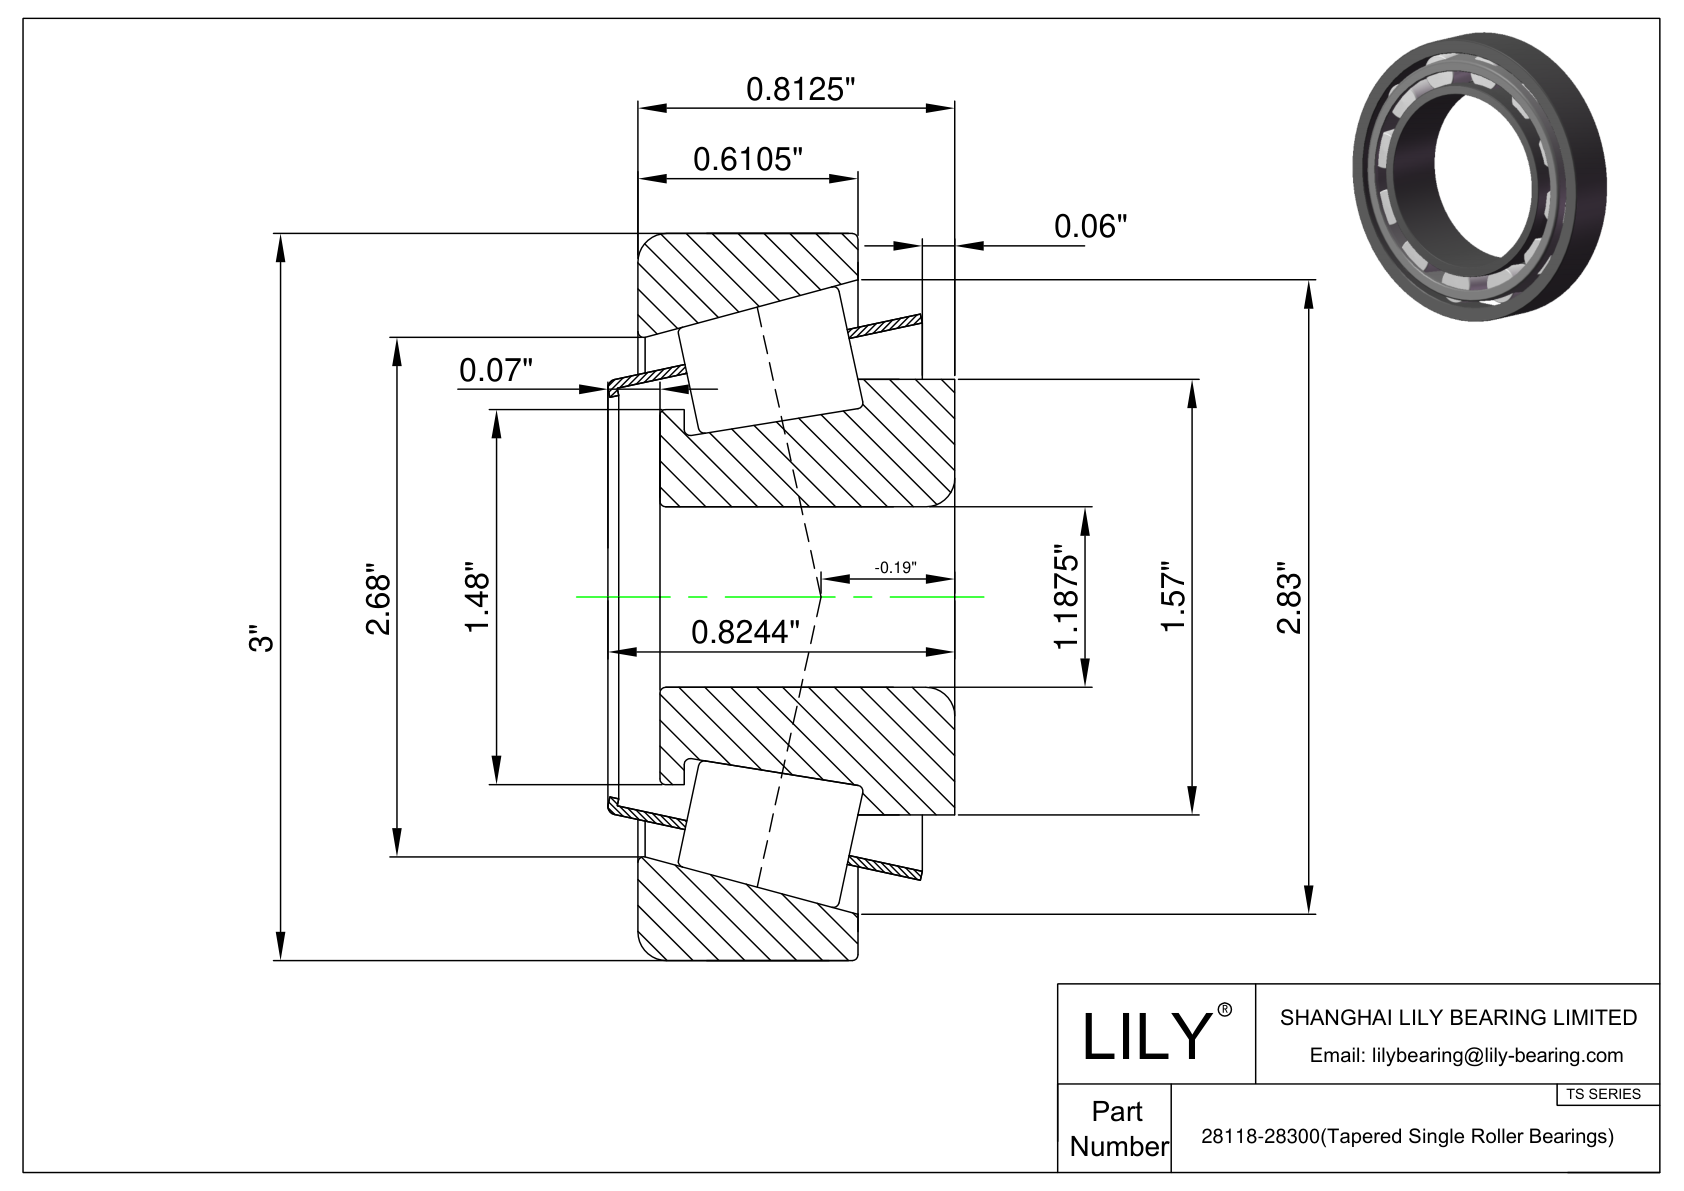 28118-28300 TS (Tapered Single Roller Bearings) (Imperial) cad drawing